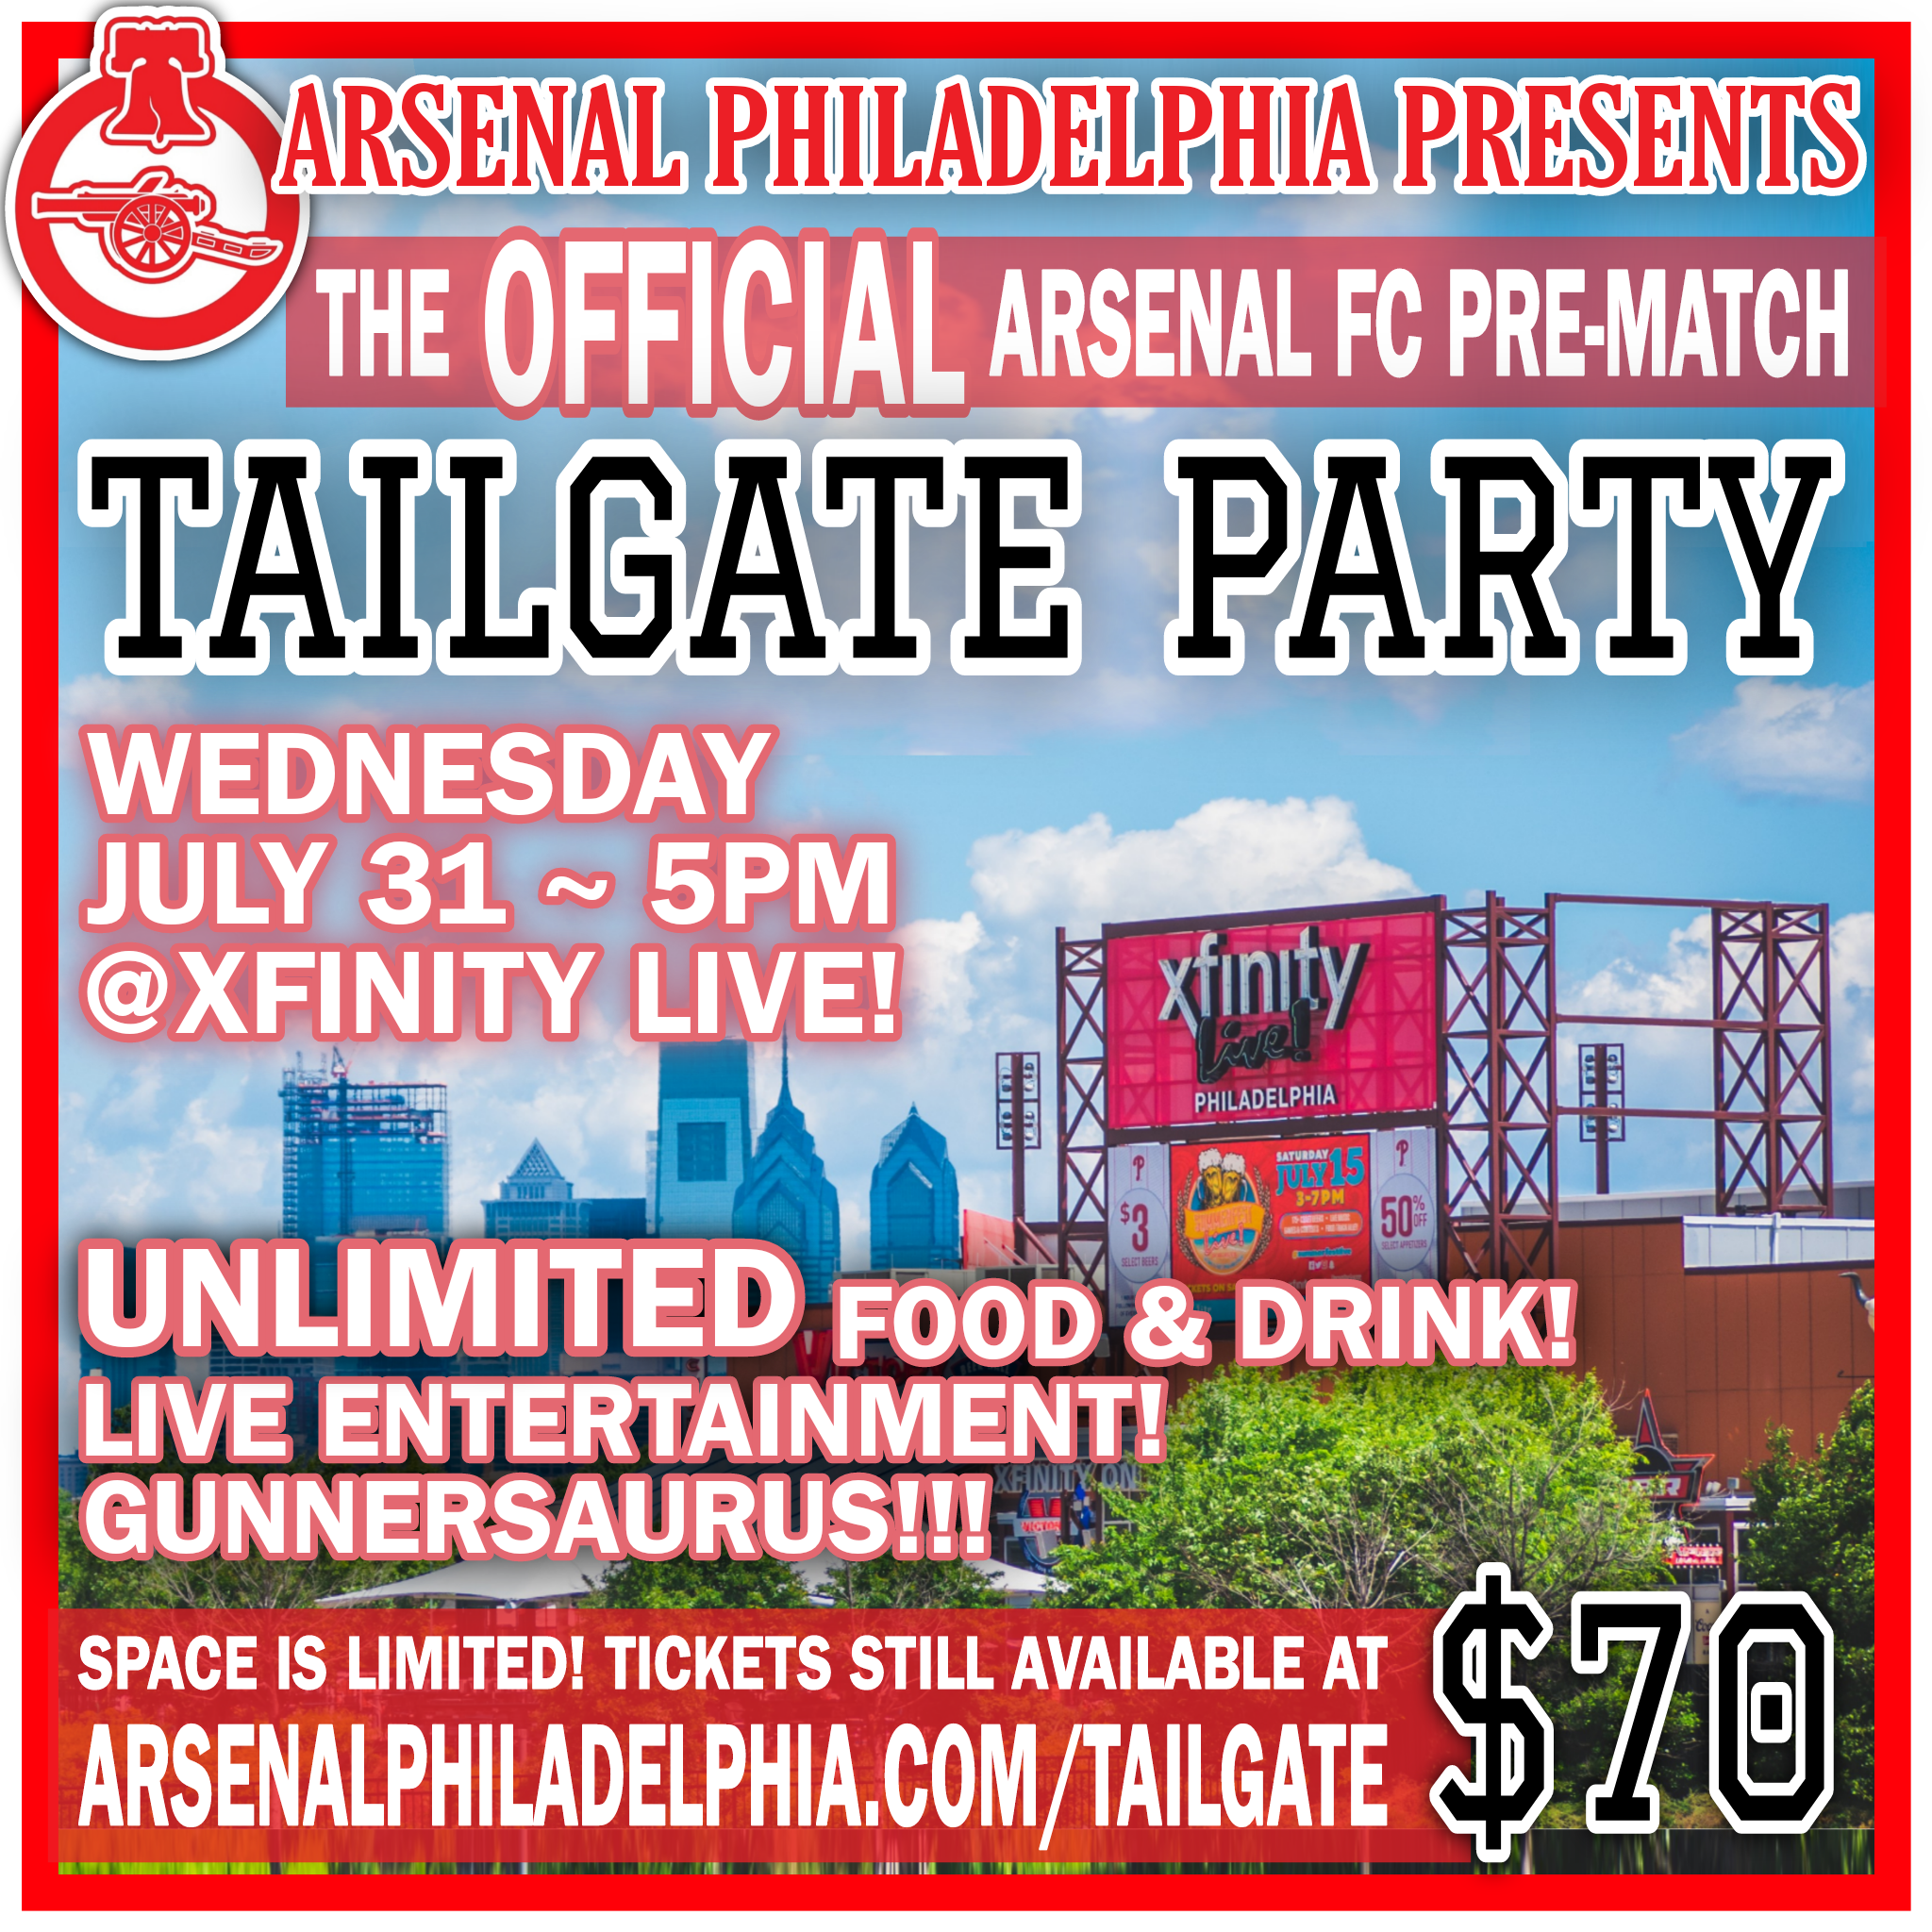 OFFICIAL ARSENAL FC PRE-MATCH TAILGATE - 5pm Wednesday July 31 @ Xfinity LIVE!